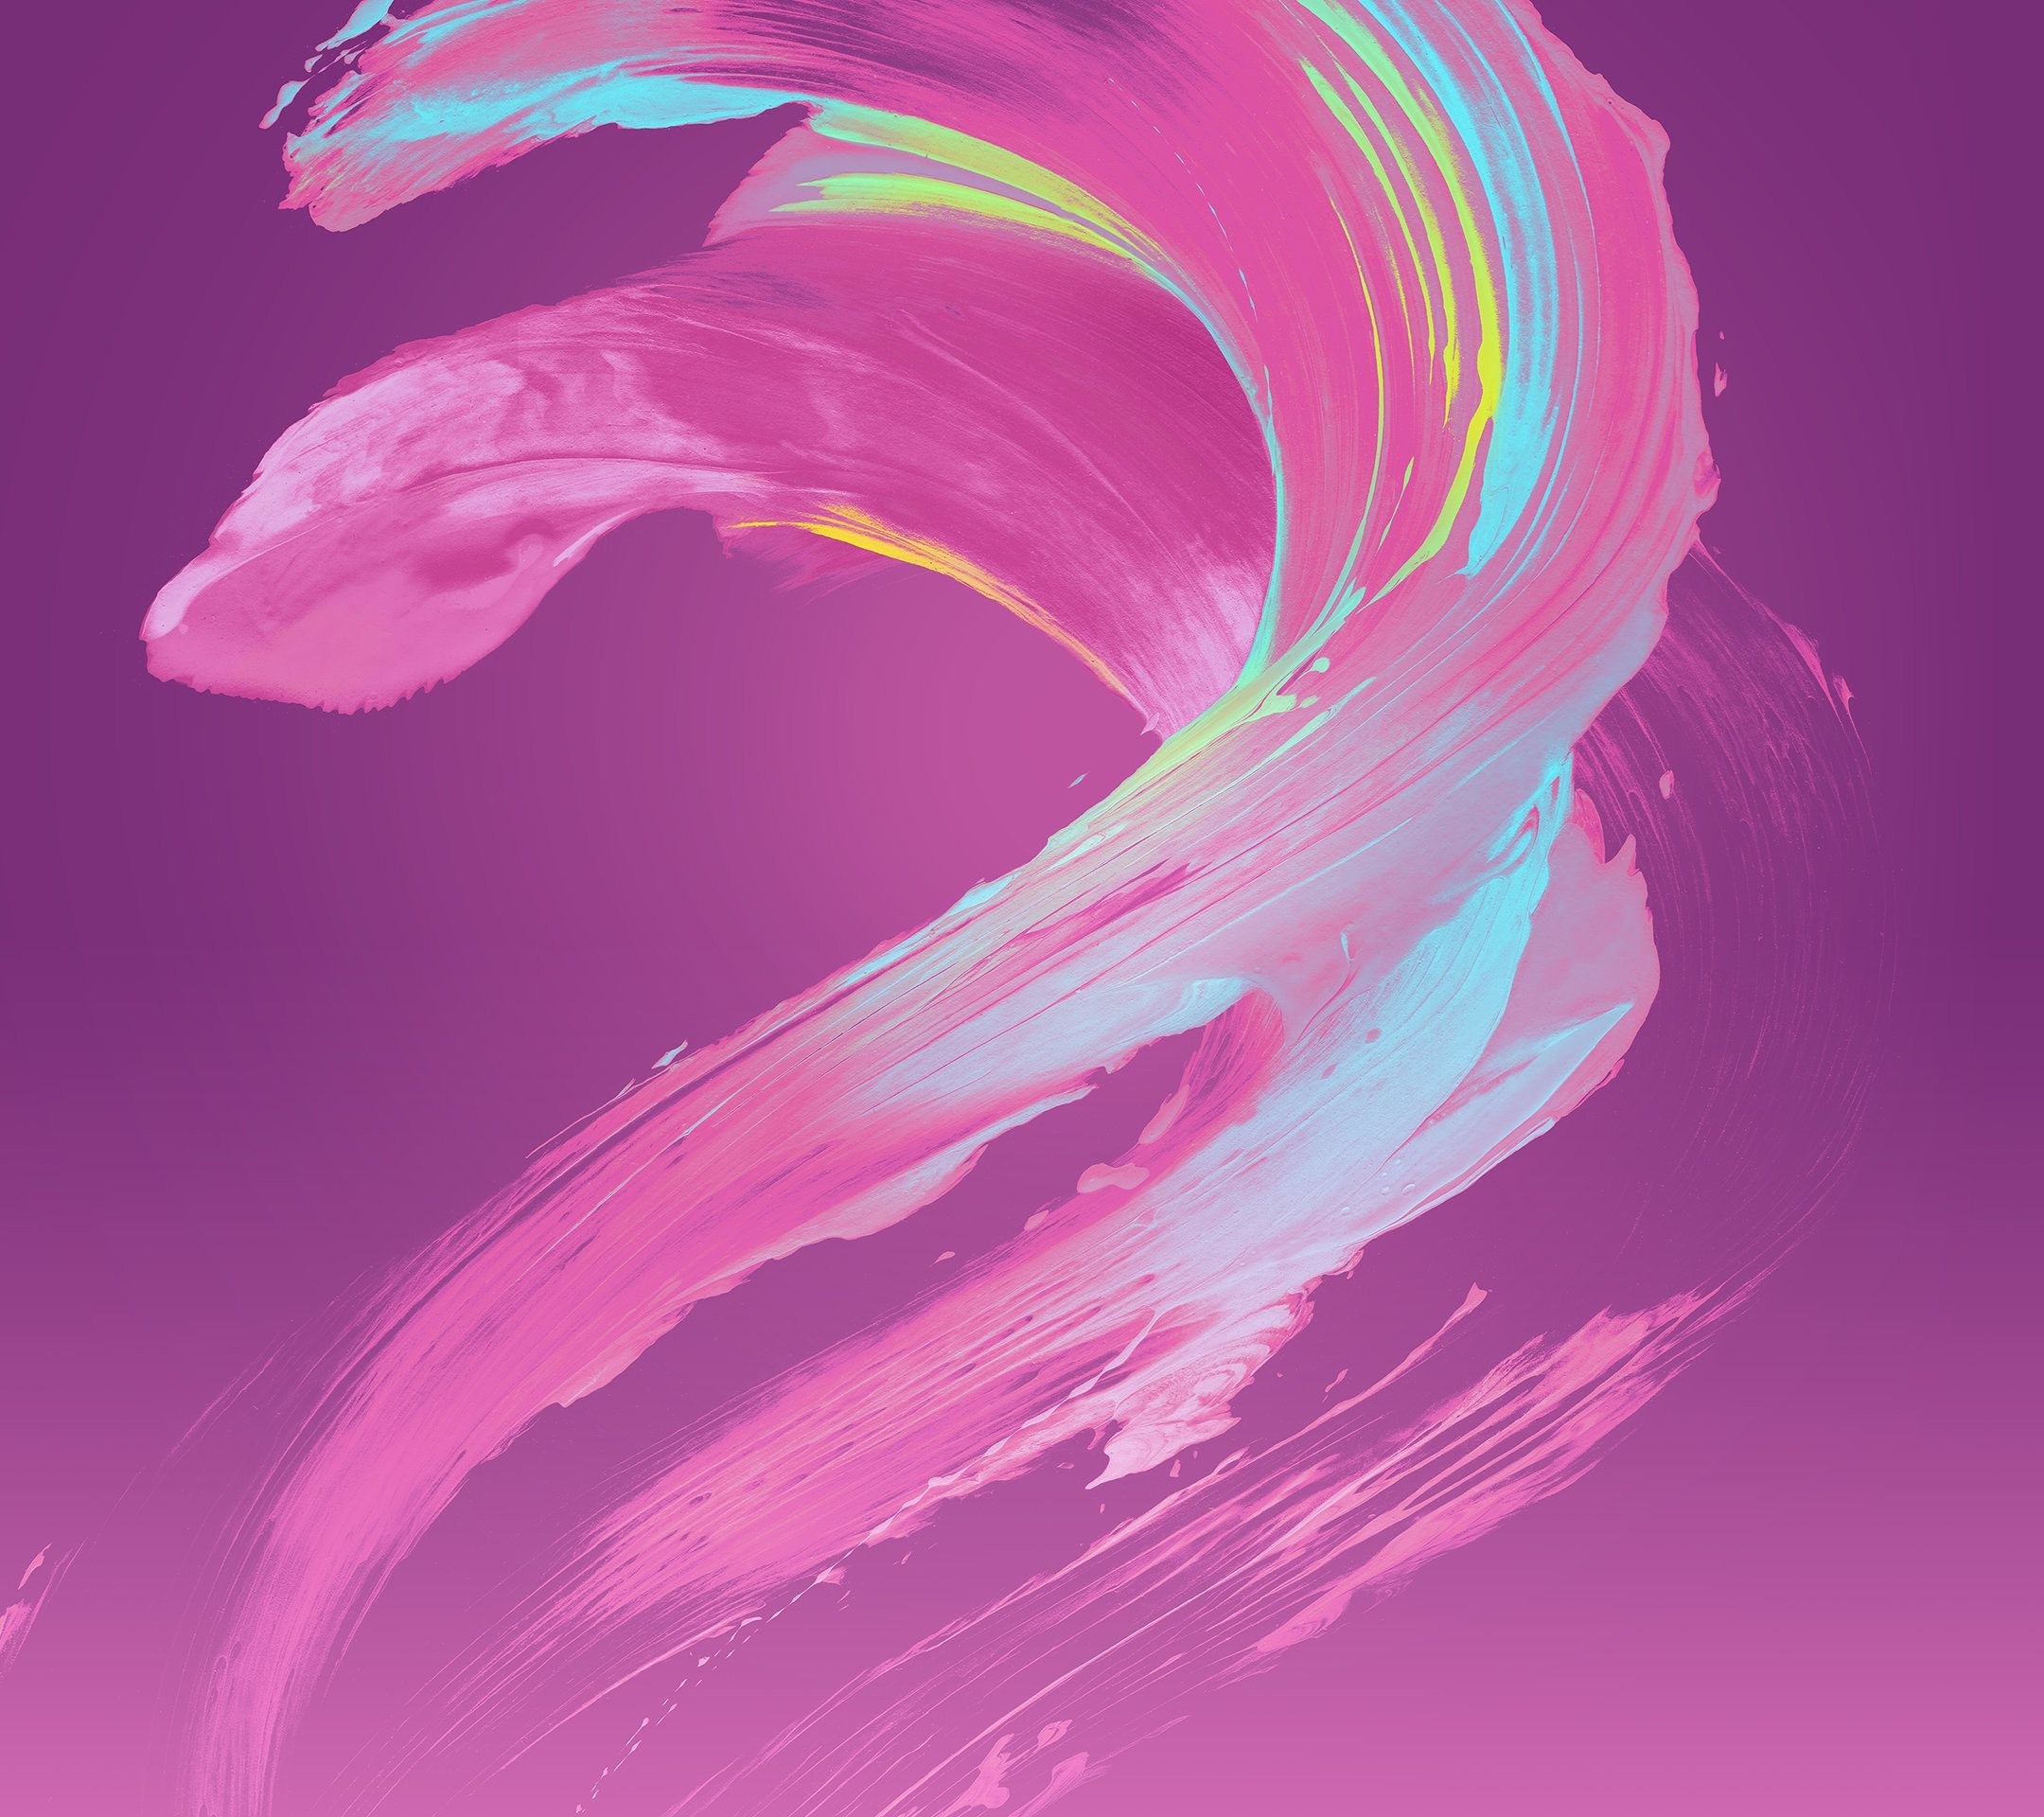 hd stock wallpapers,pink,magenta,feather,graphic design,illustration